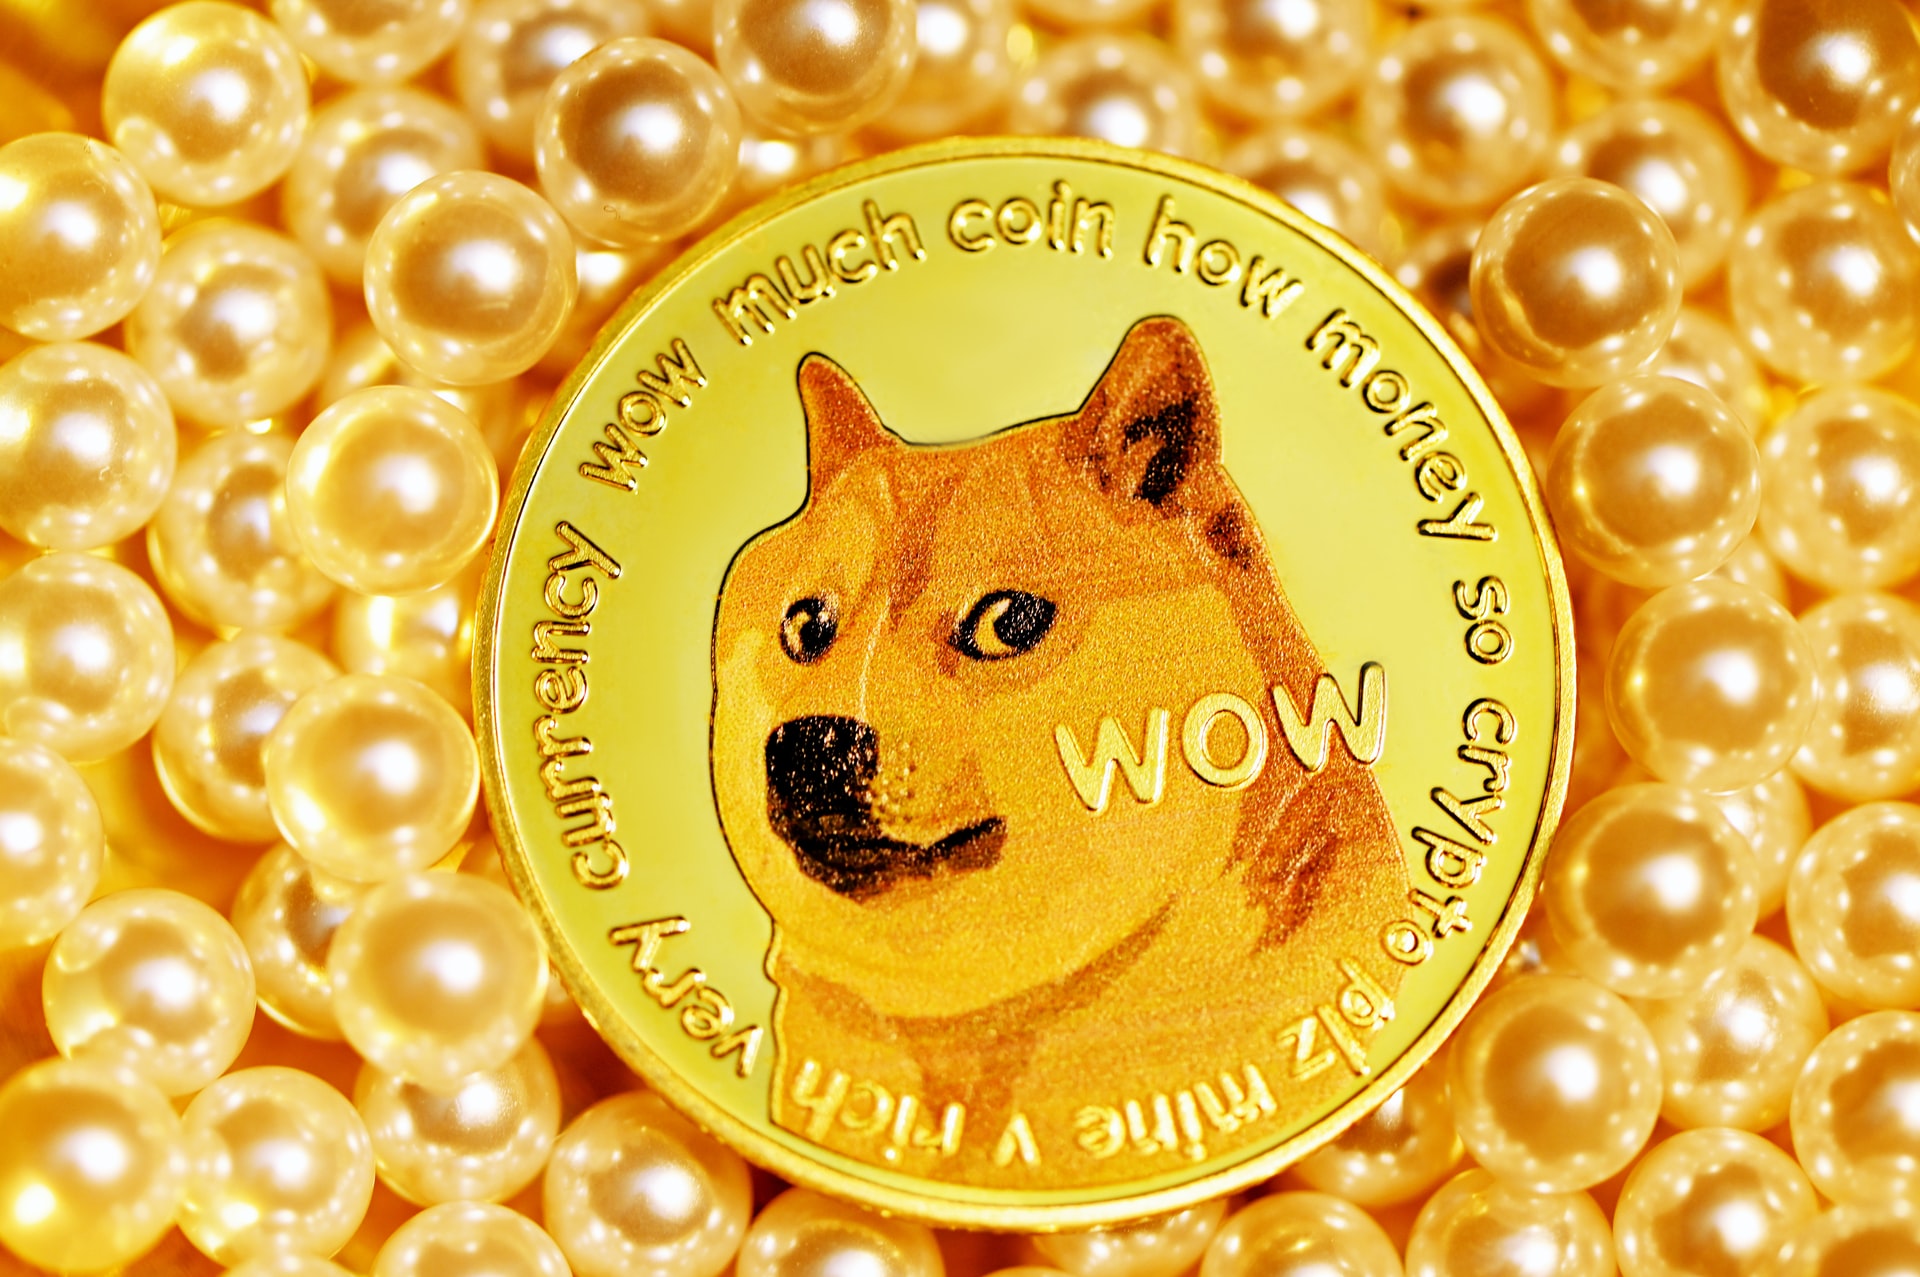 How to Buy Dogecoin Using Trust Wallet: A Visual Guide | Trust